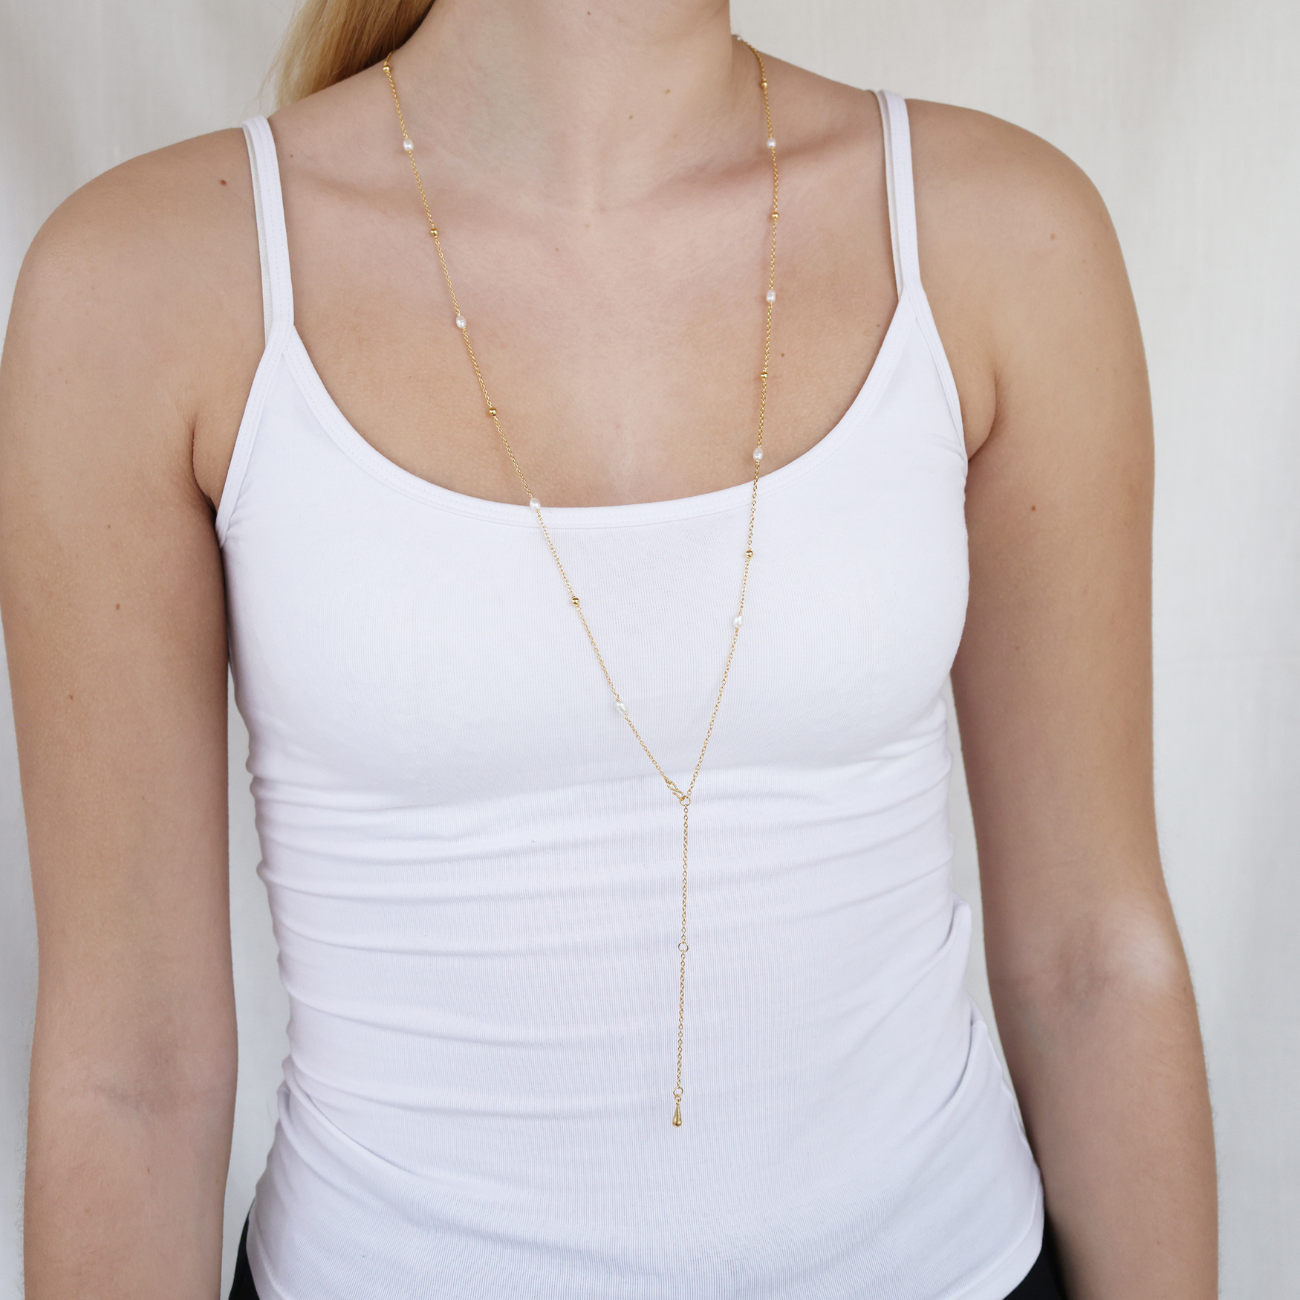 Ava double pearl necklace 18k gold